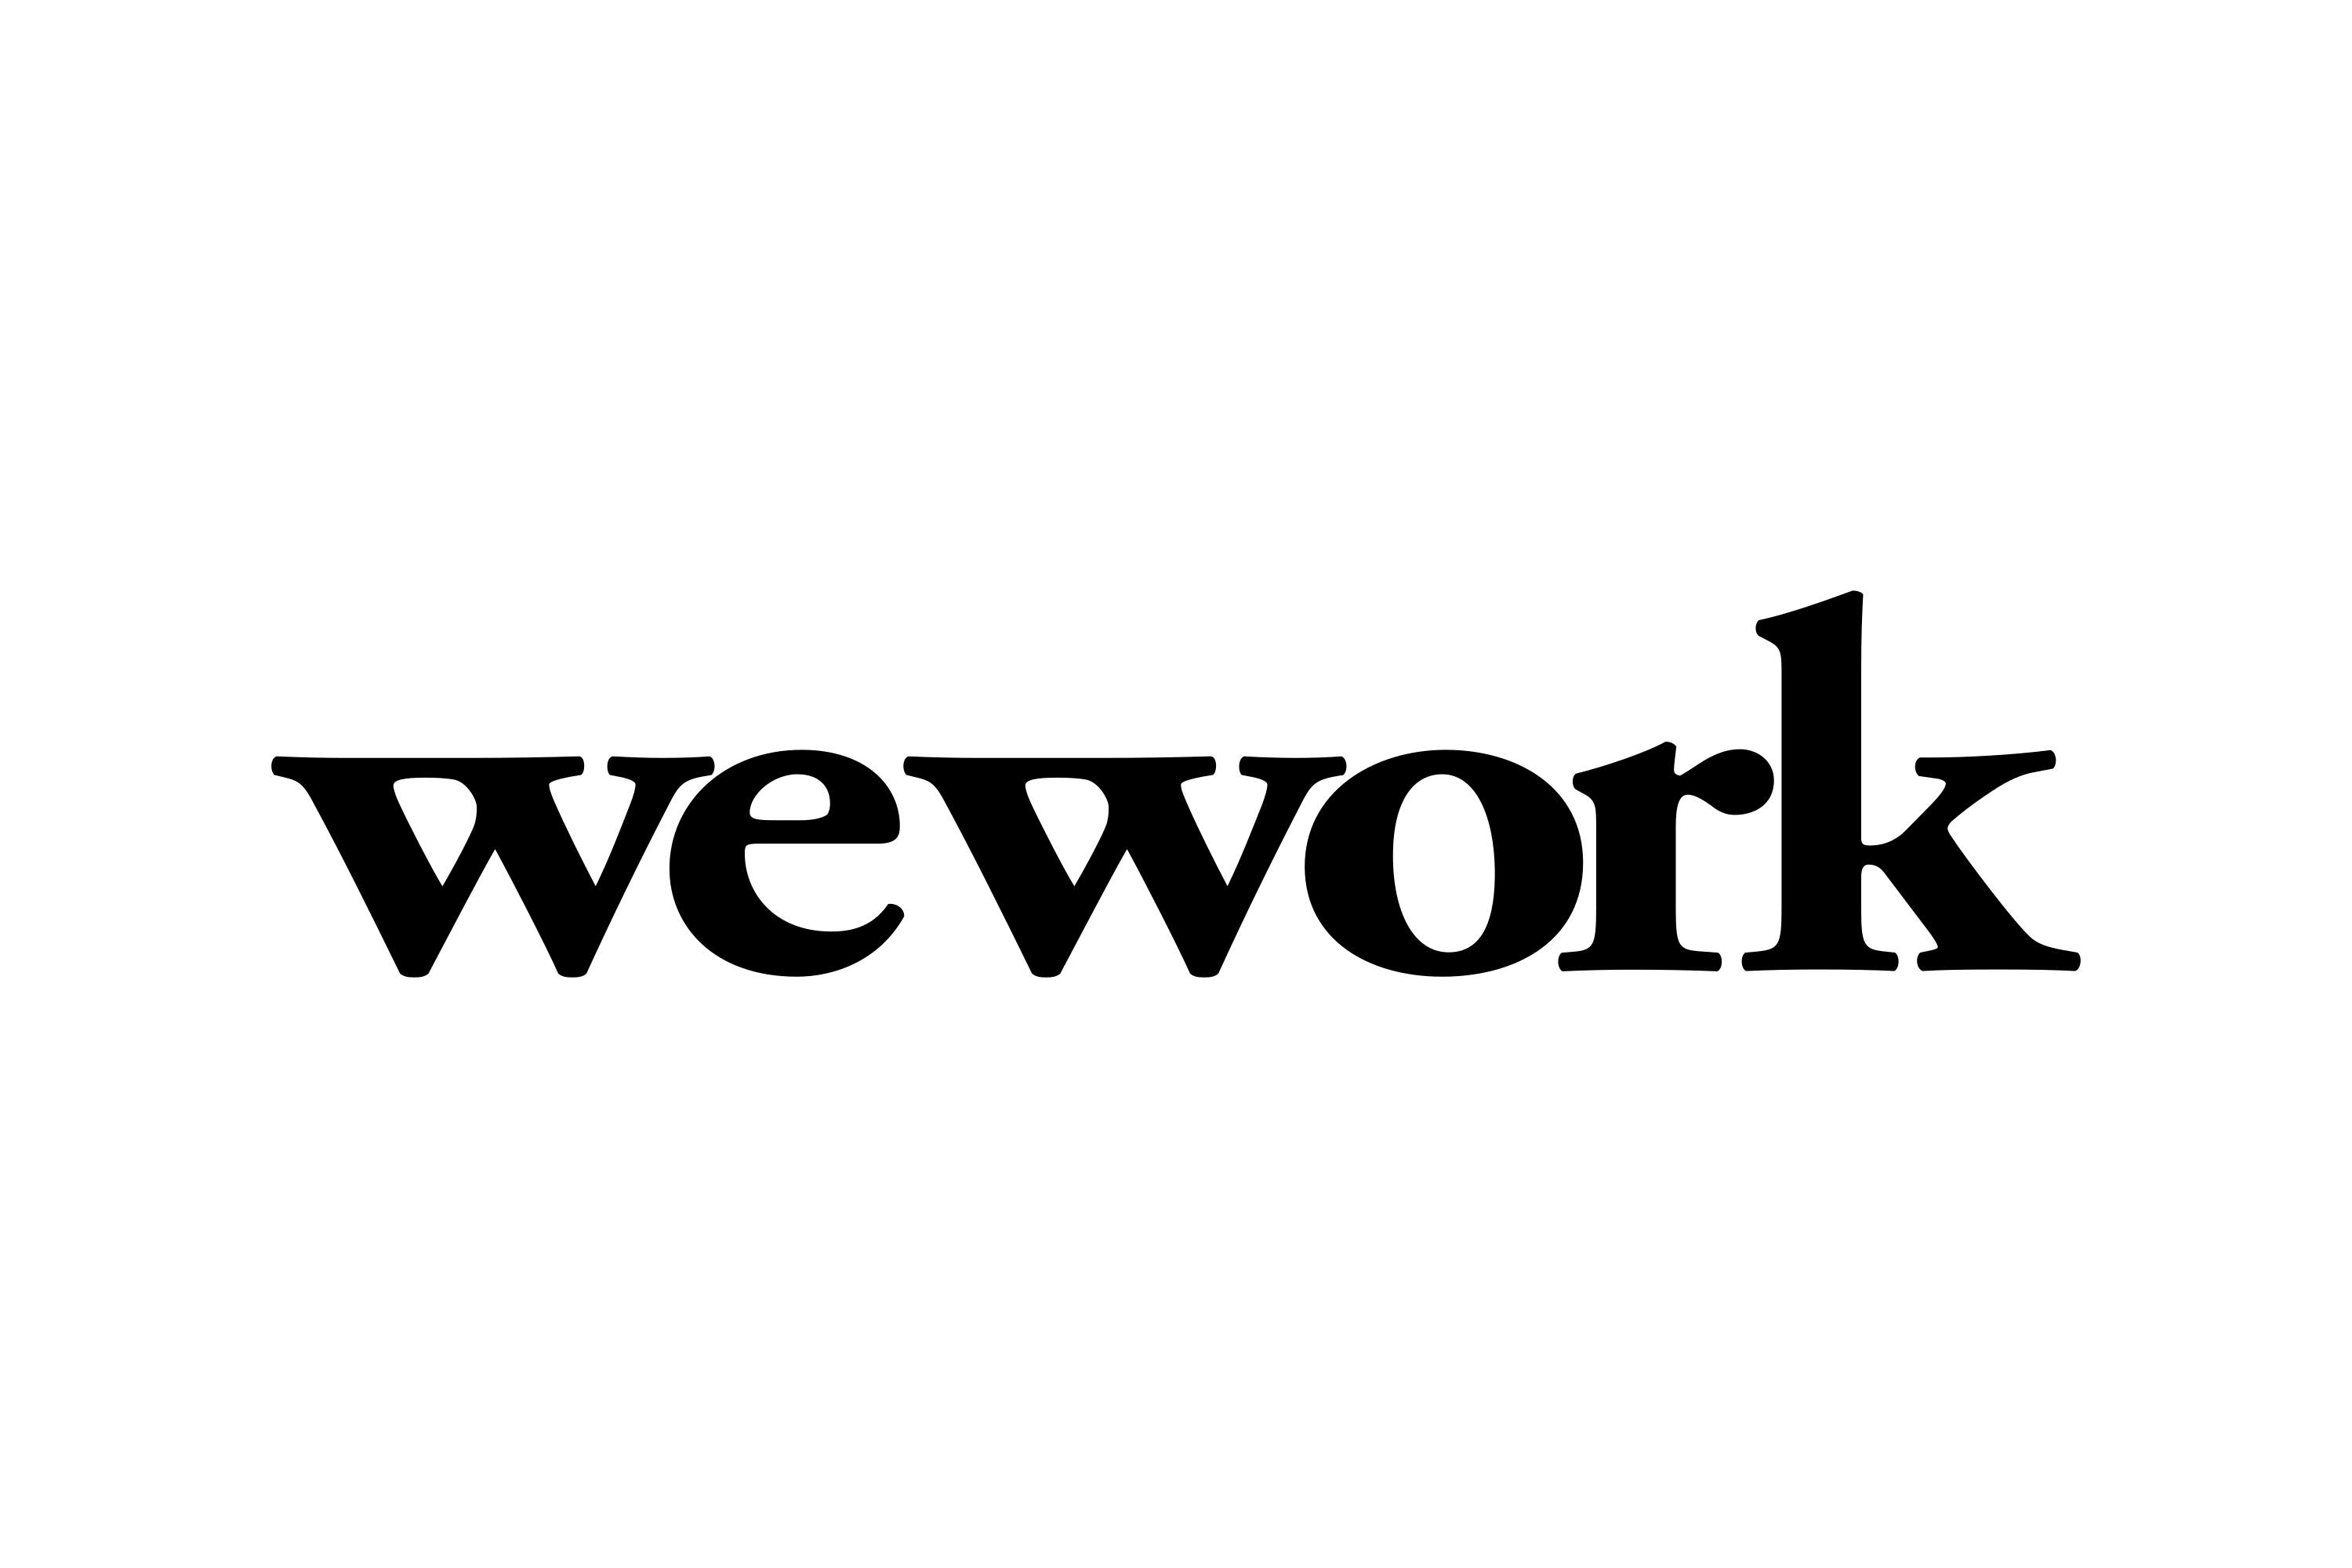 WeWork stock started trading two years after a failed IPO-thumnail